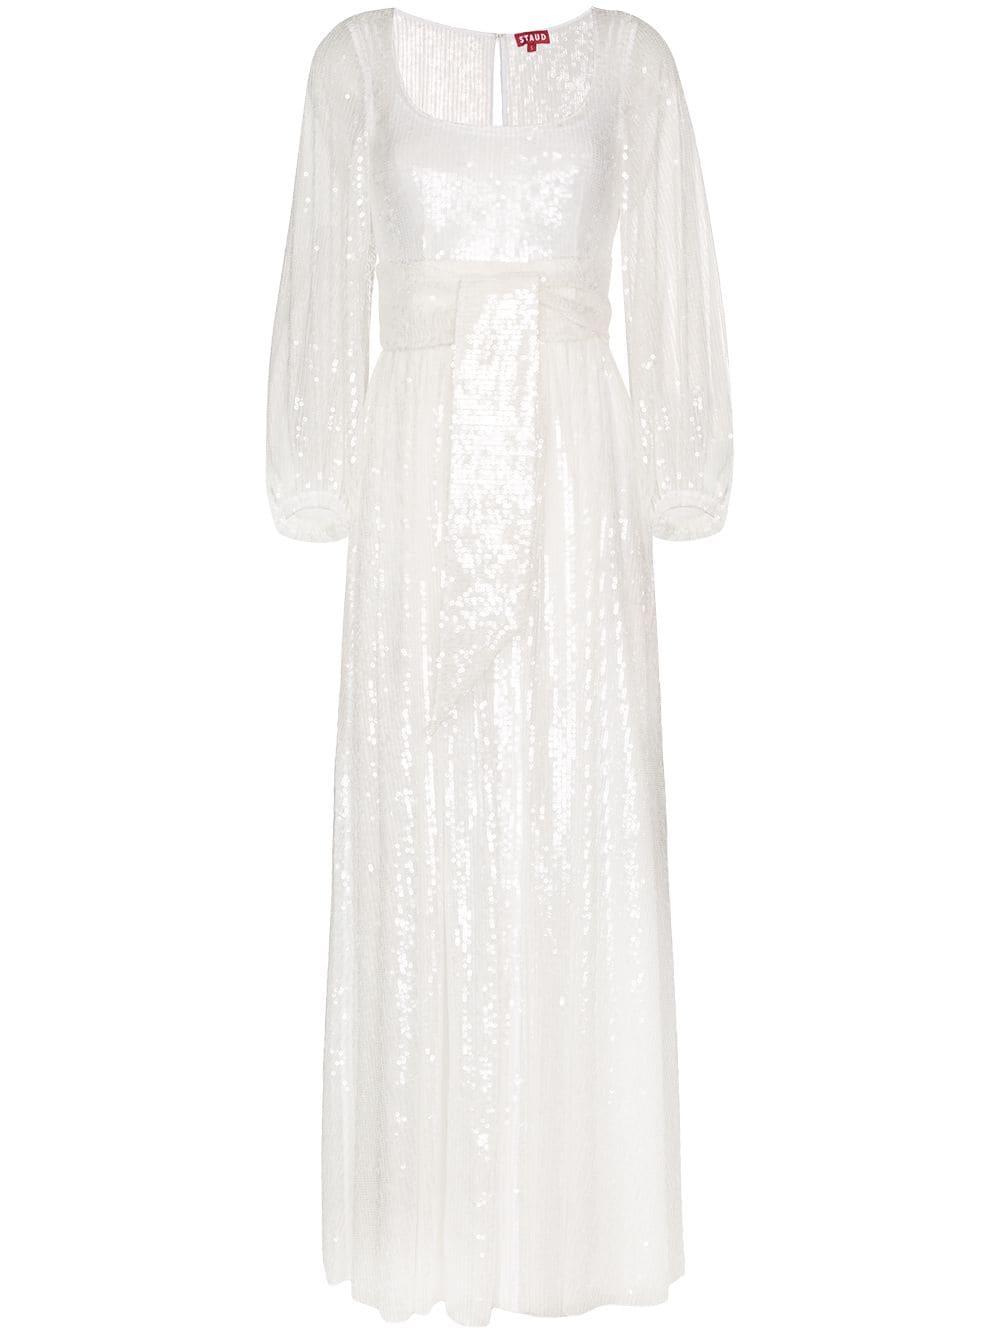 STAUD Sequin Embellished Maxi Dress in White | Lyst